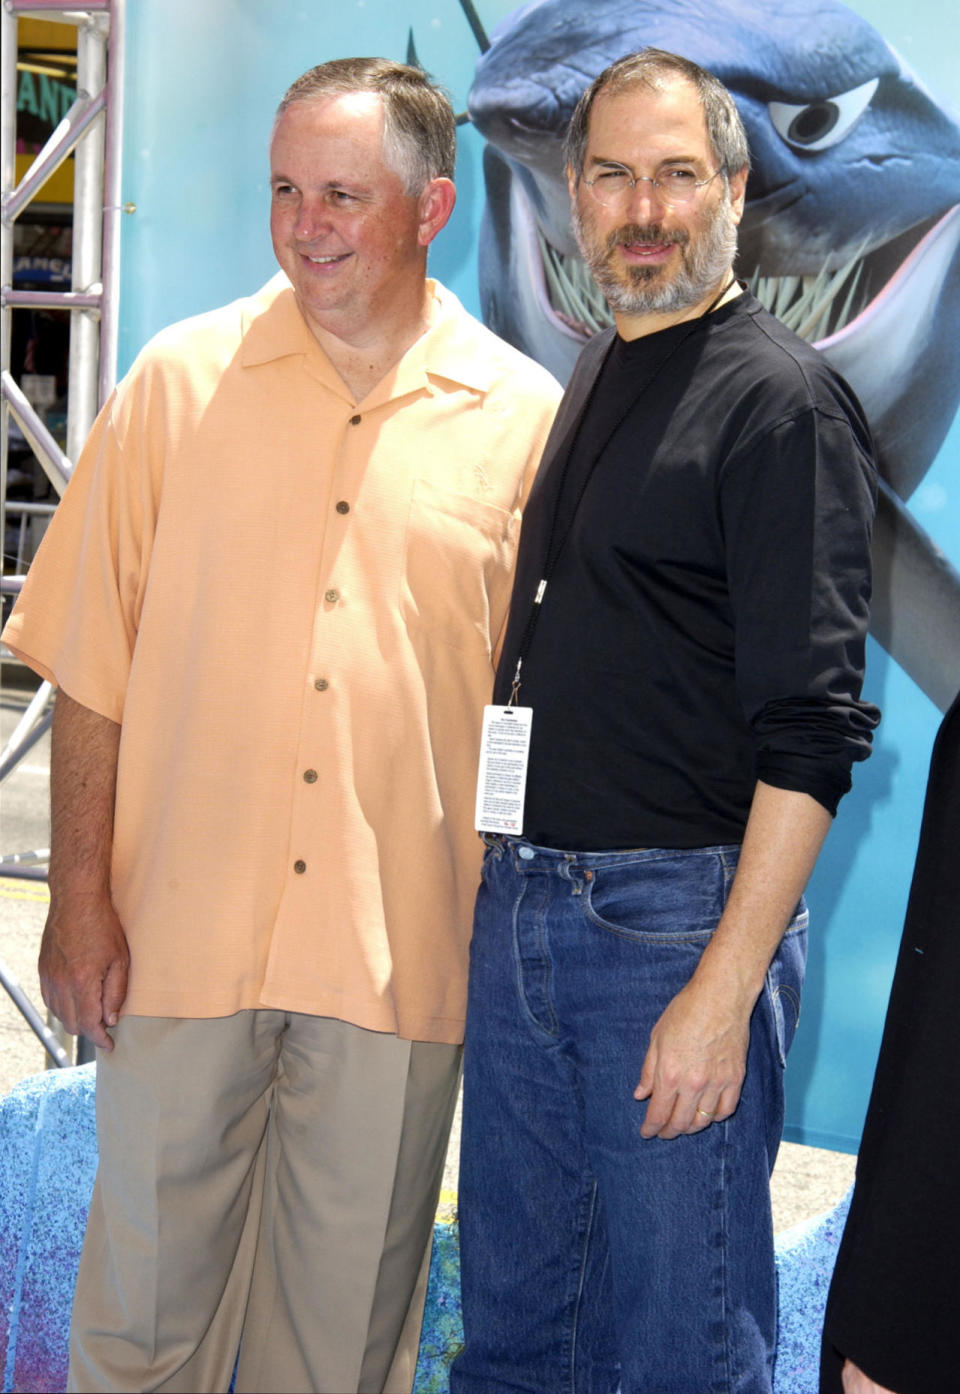 Dick Cook and Steve Jobs